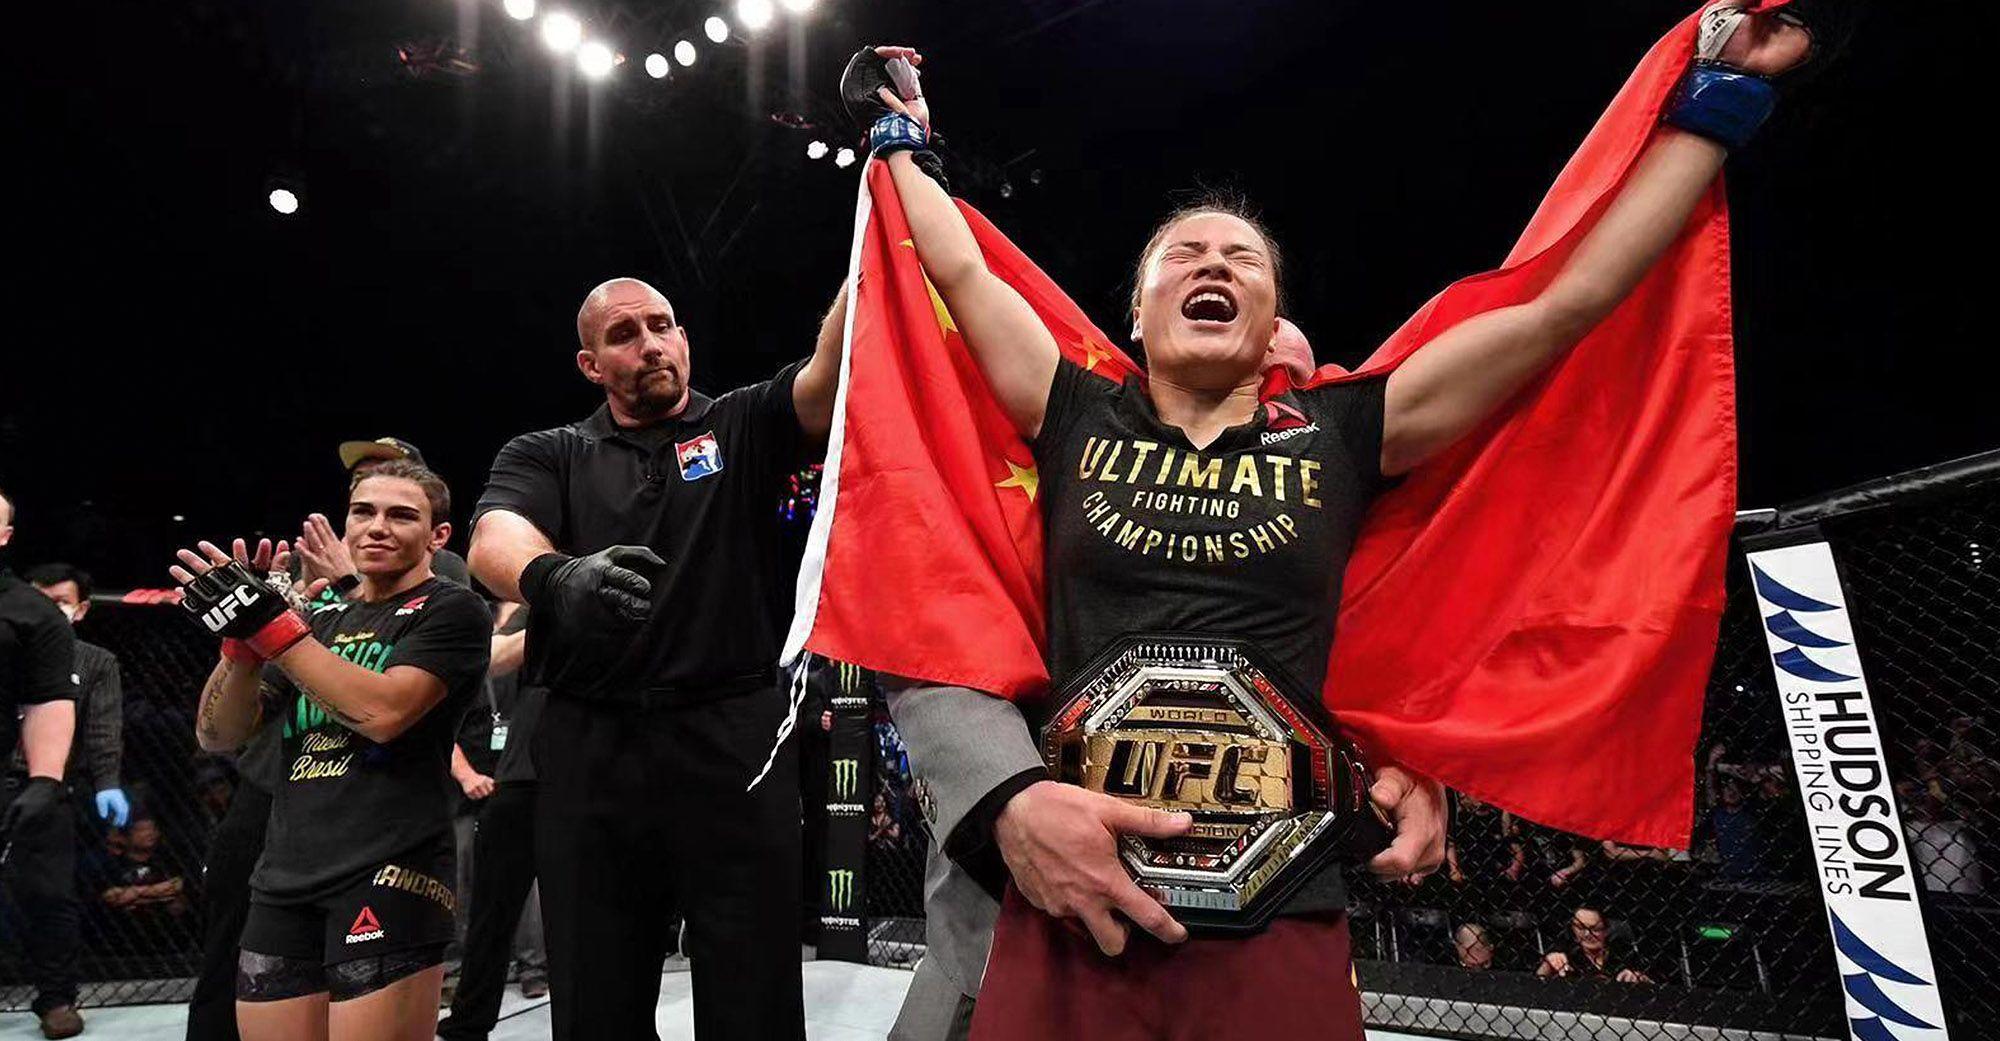 Zhang Weili earns her first UFC championship with a 42-second KO over Jéssica Andrade. Credit: Xinhua.